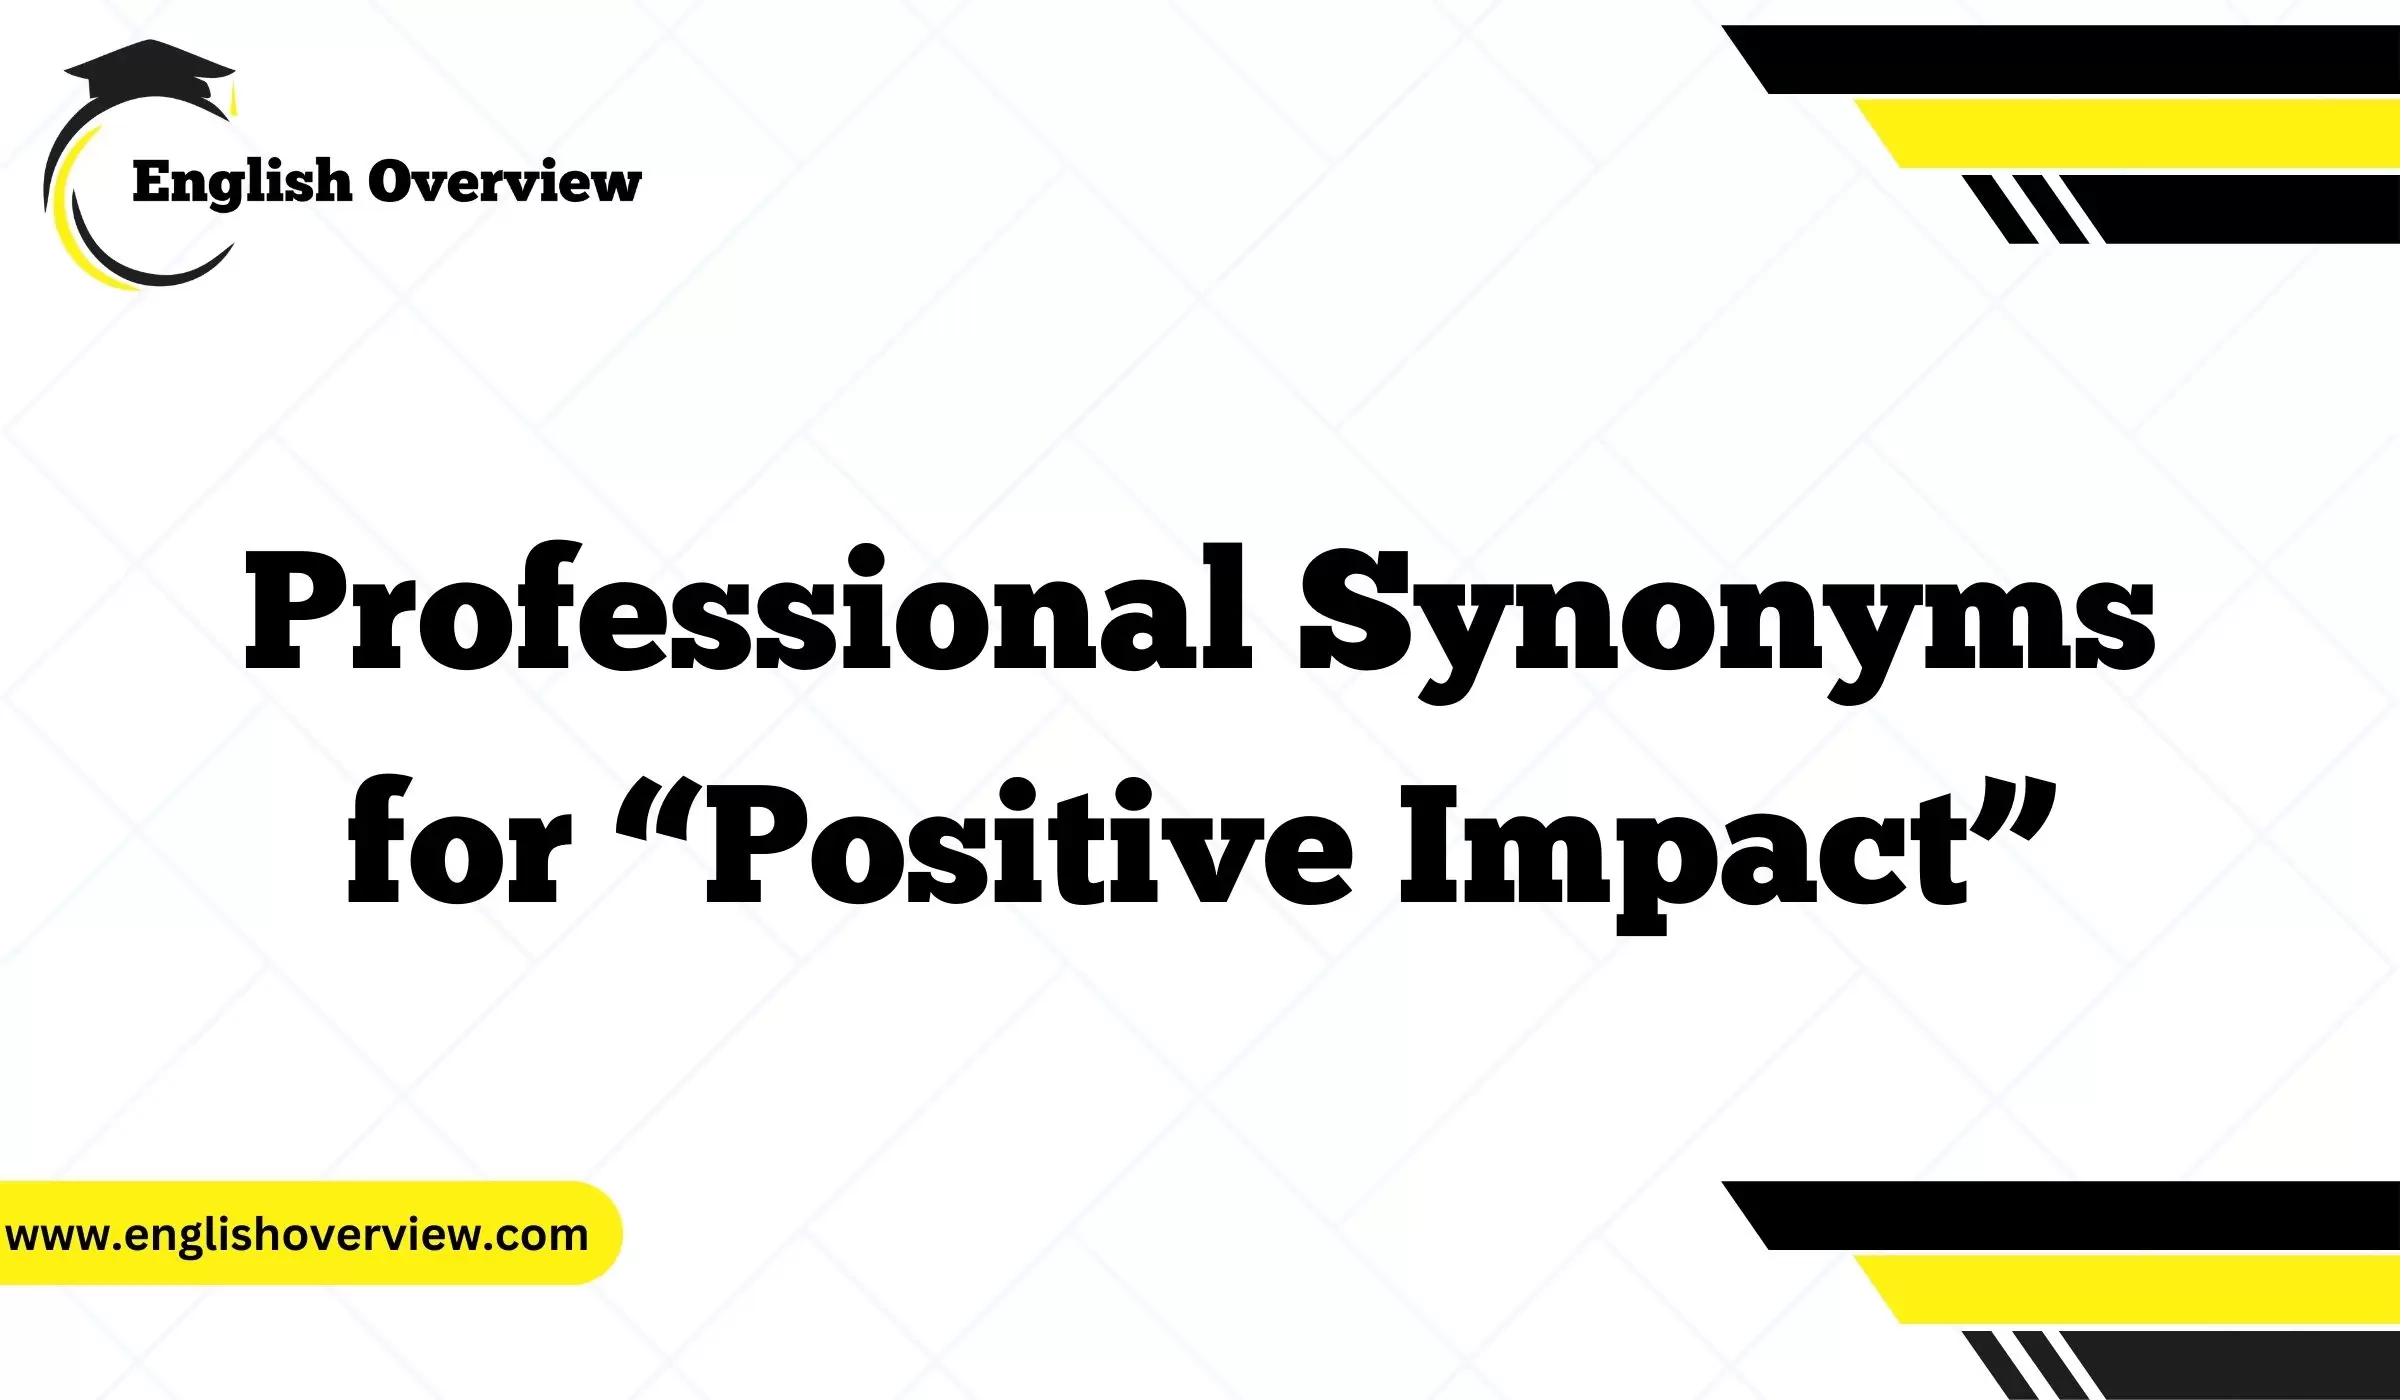 Professional Synonyms for “Positive Impact”